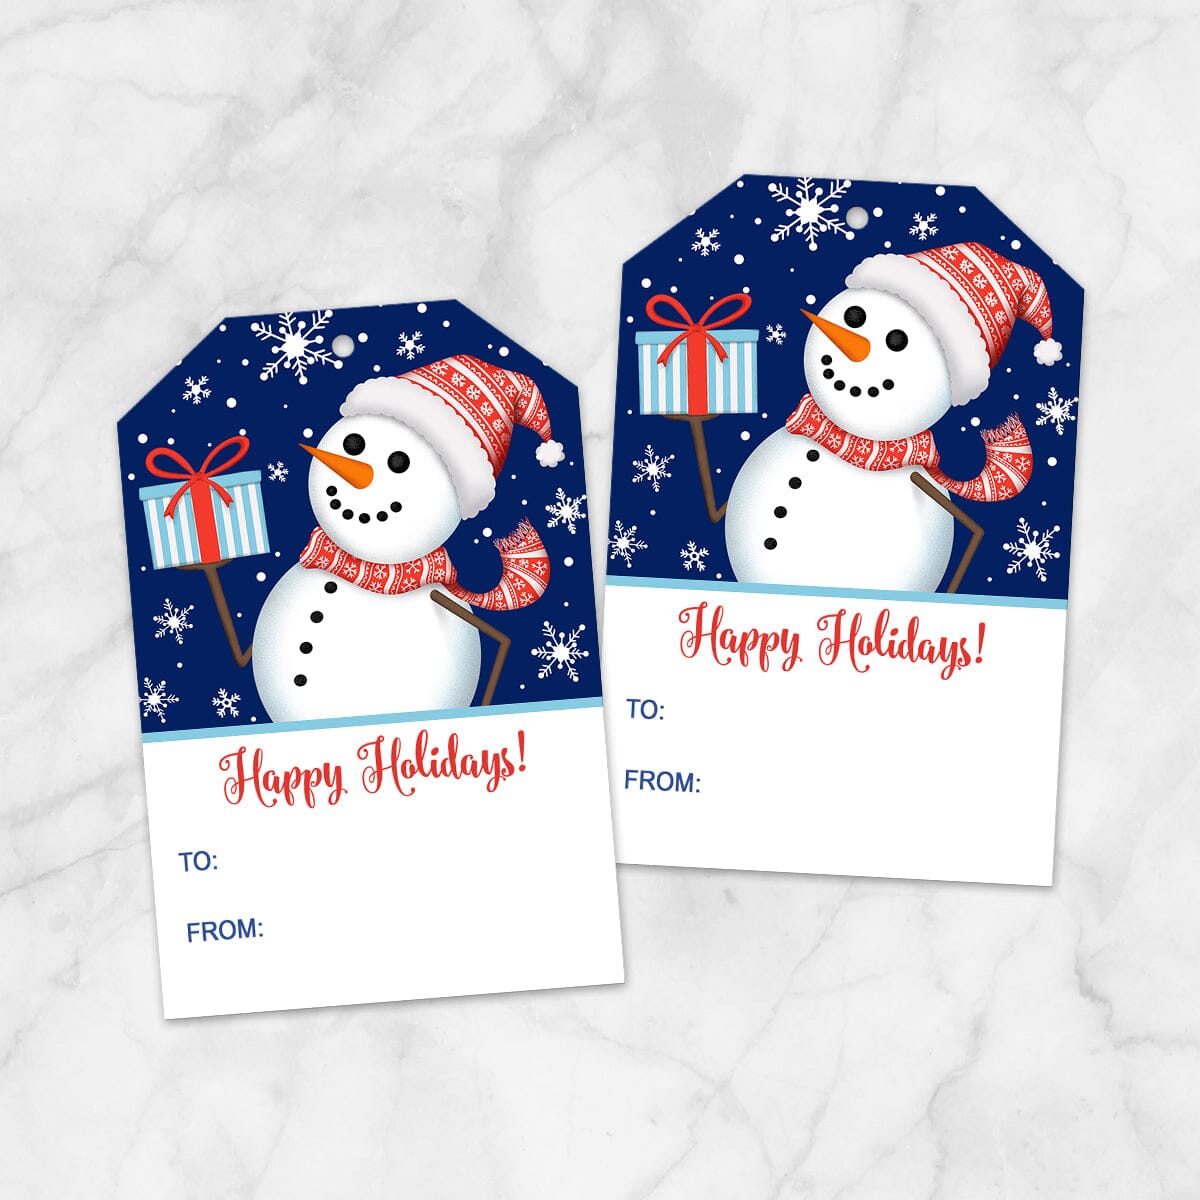 Printable Winter Snowman Happy Holidays Gift Tags from Printable Planning.